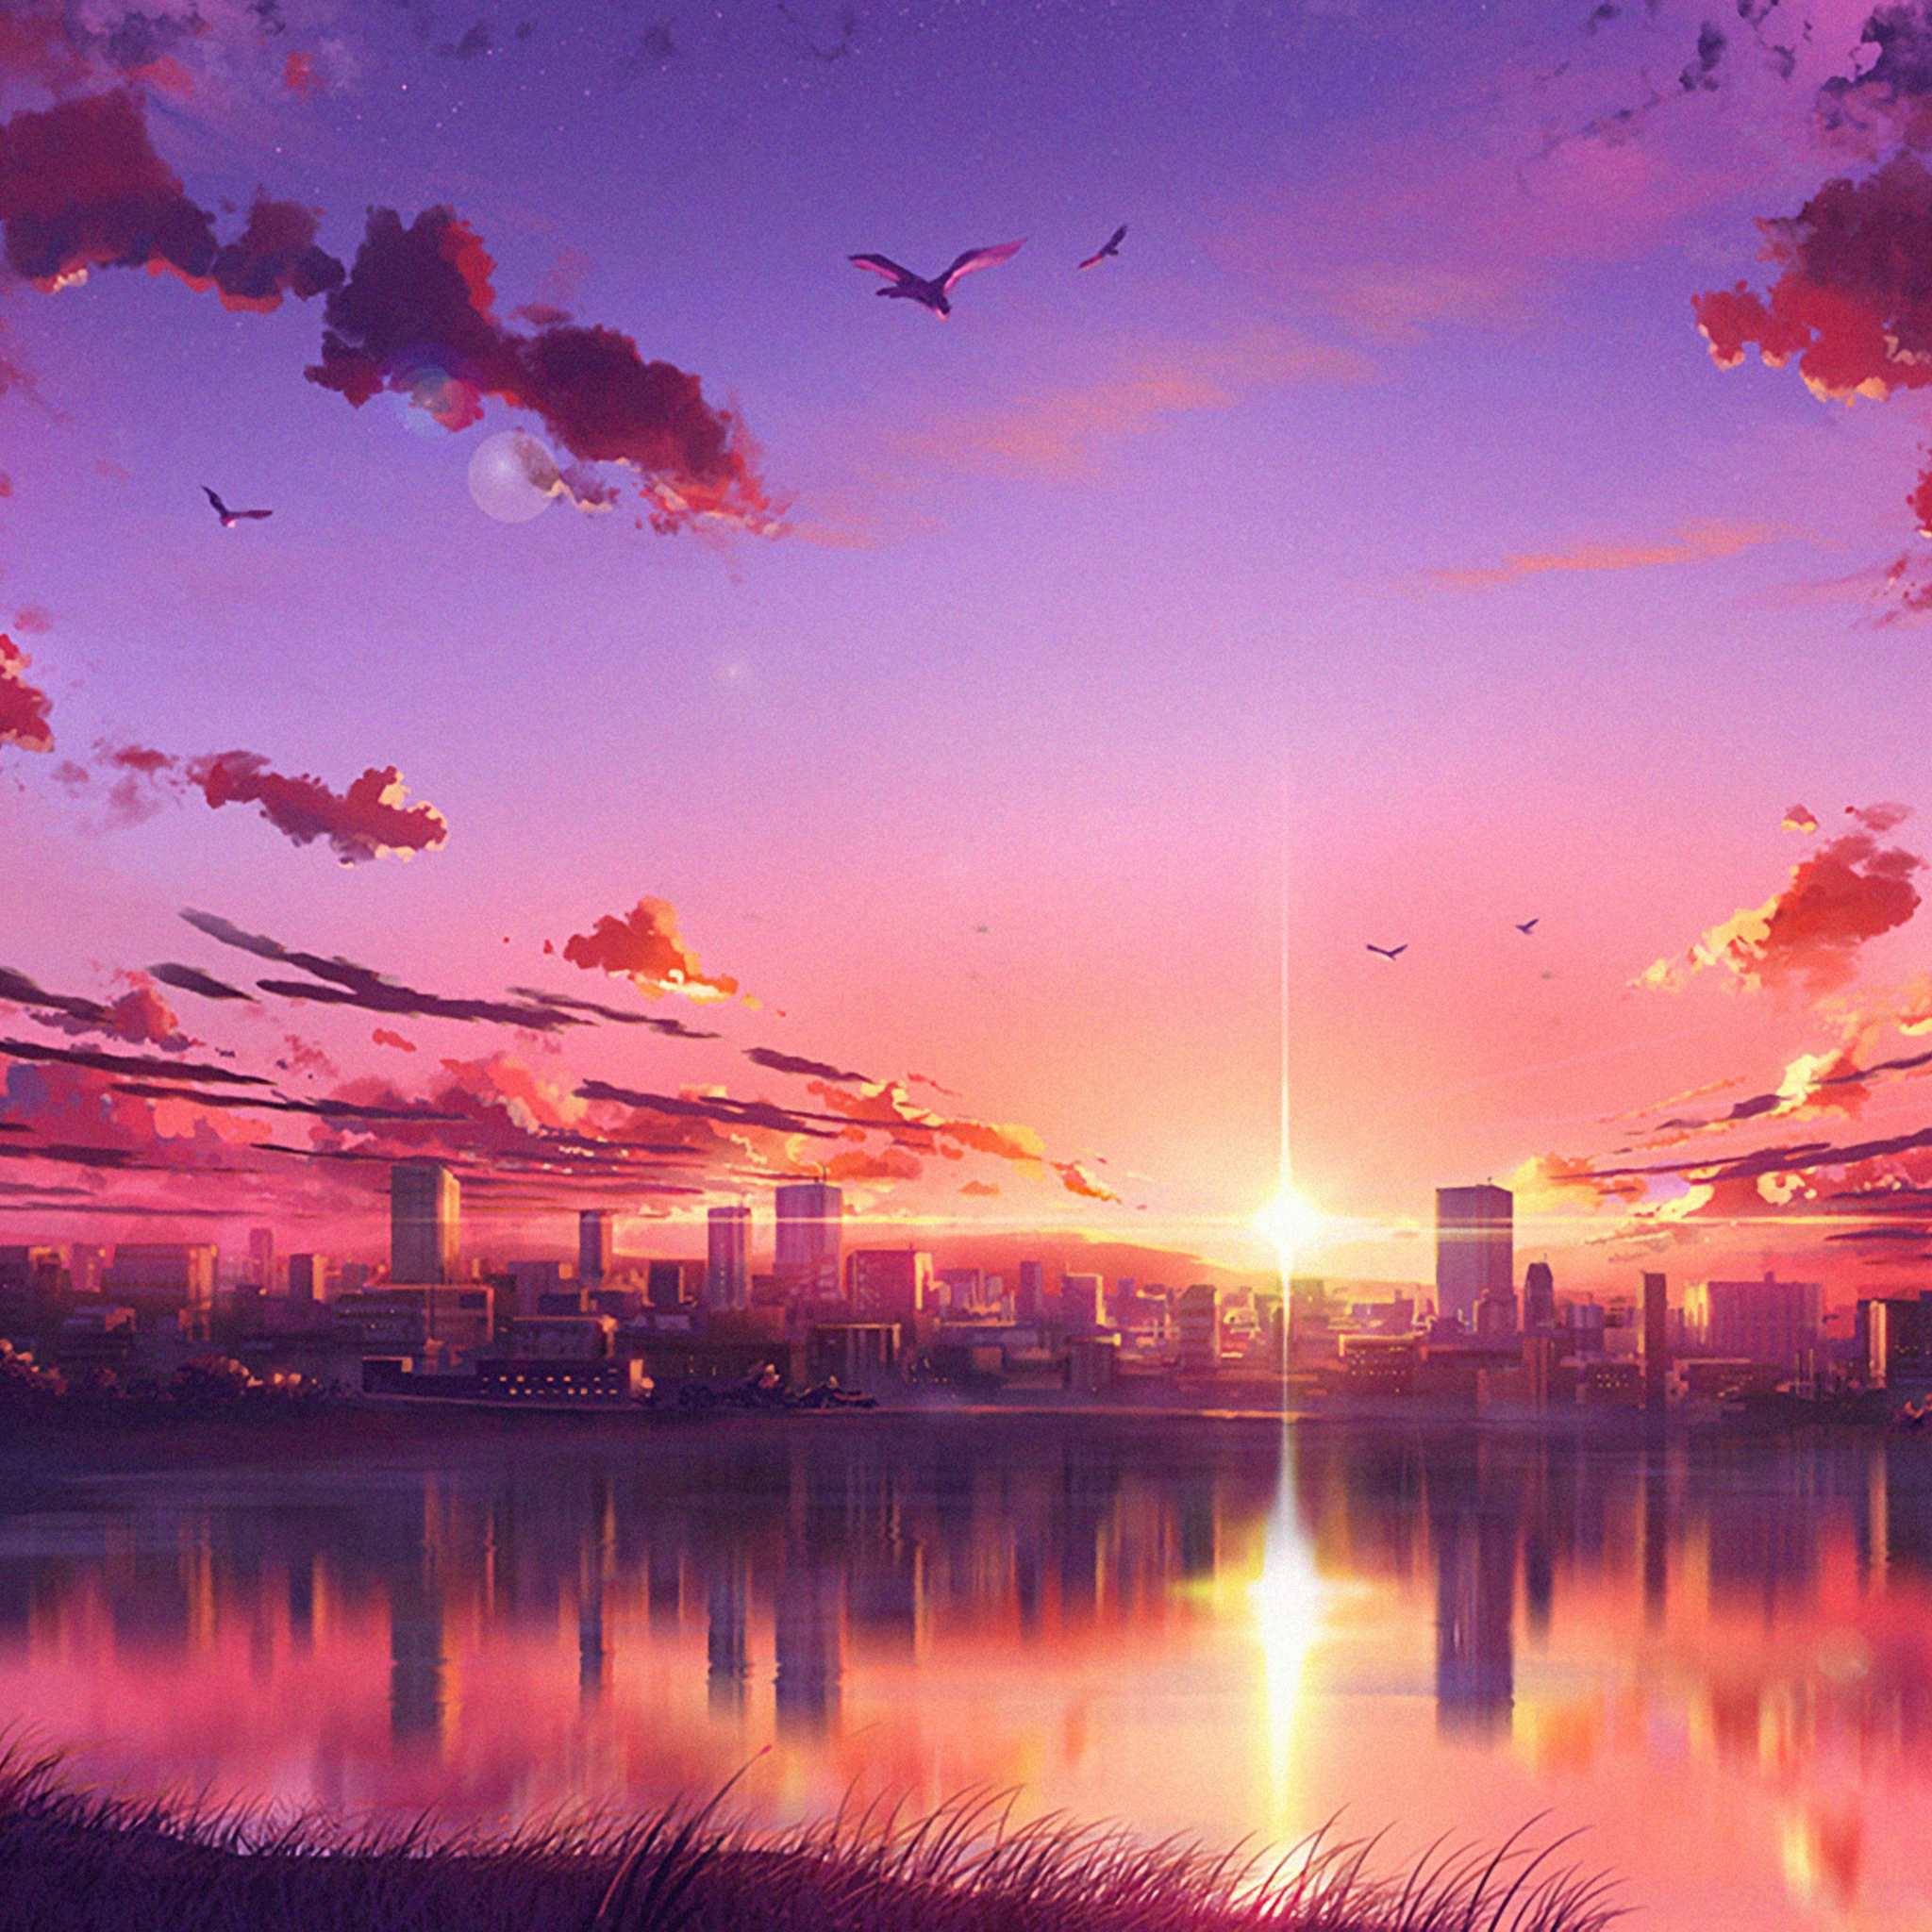 Anime Sunset wallpaper by jmzeffect - Download on ZEDGE™ | 6c5d